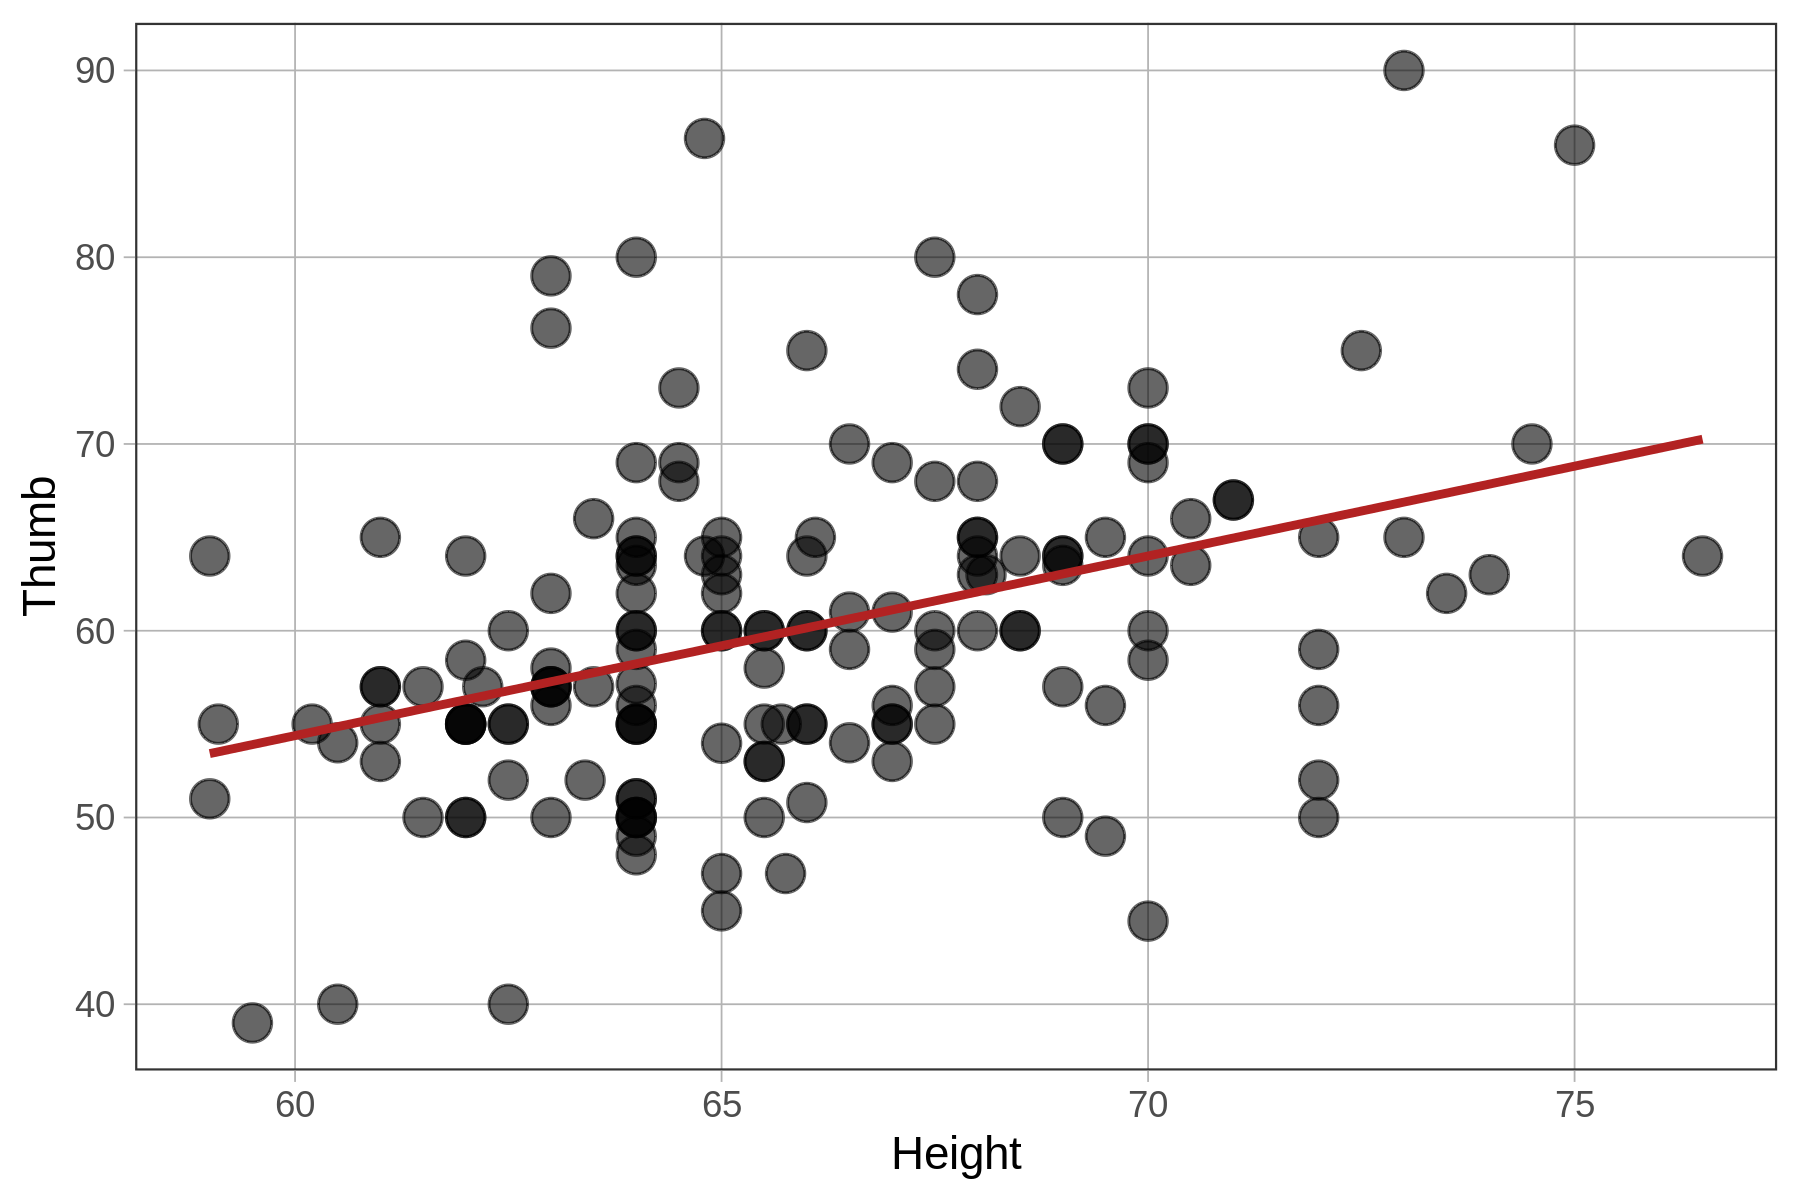 A scatterplot of the distribution of Thumb by Height.